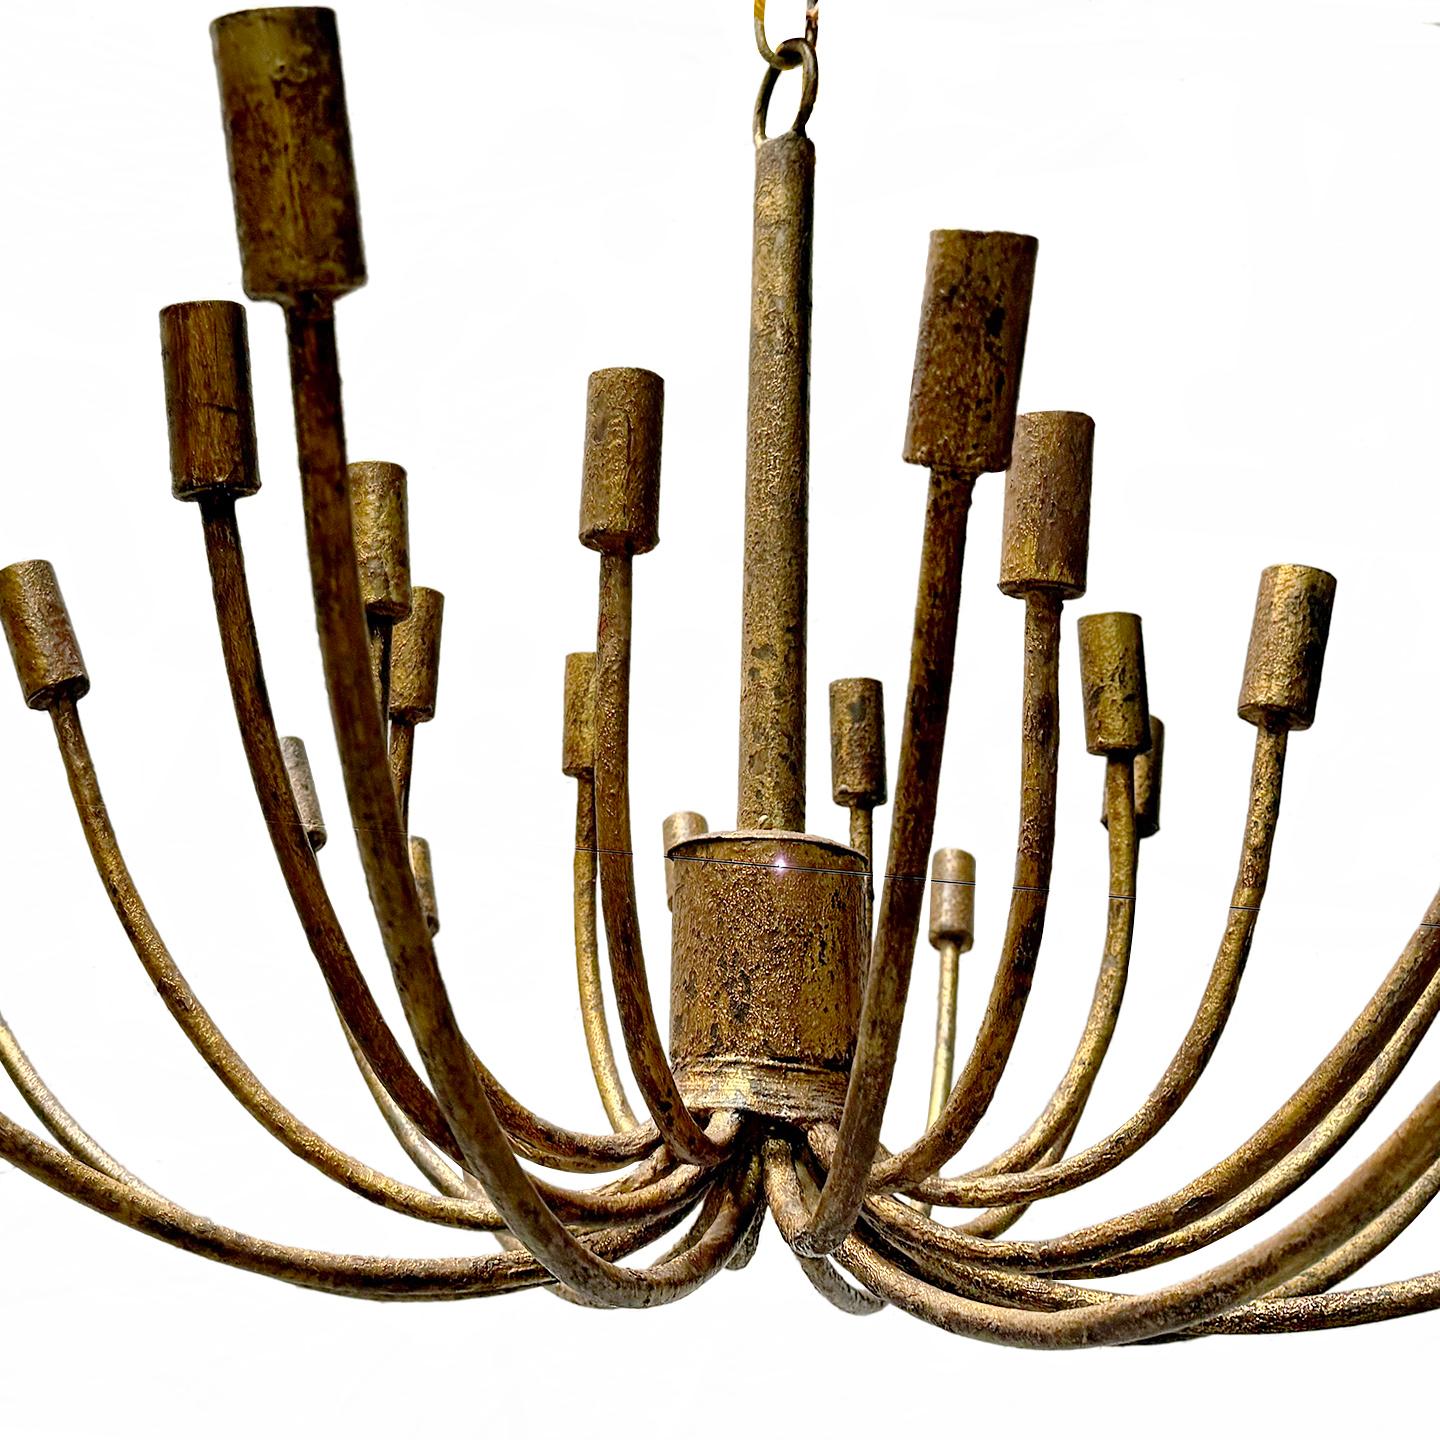 A circa 1960's French gilt metal light fixture with 24 candelabra lights.

Measurements:
Height: 32